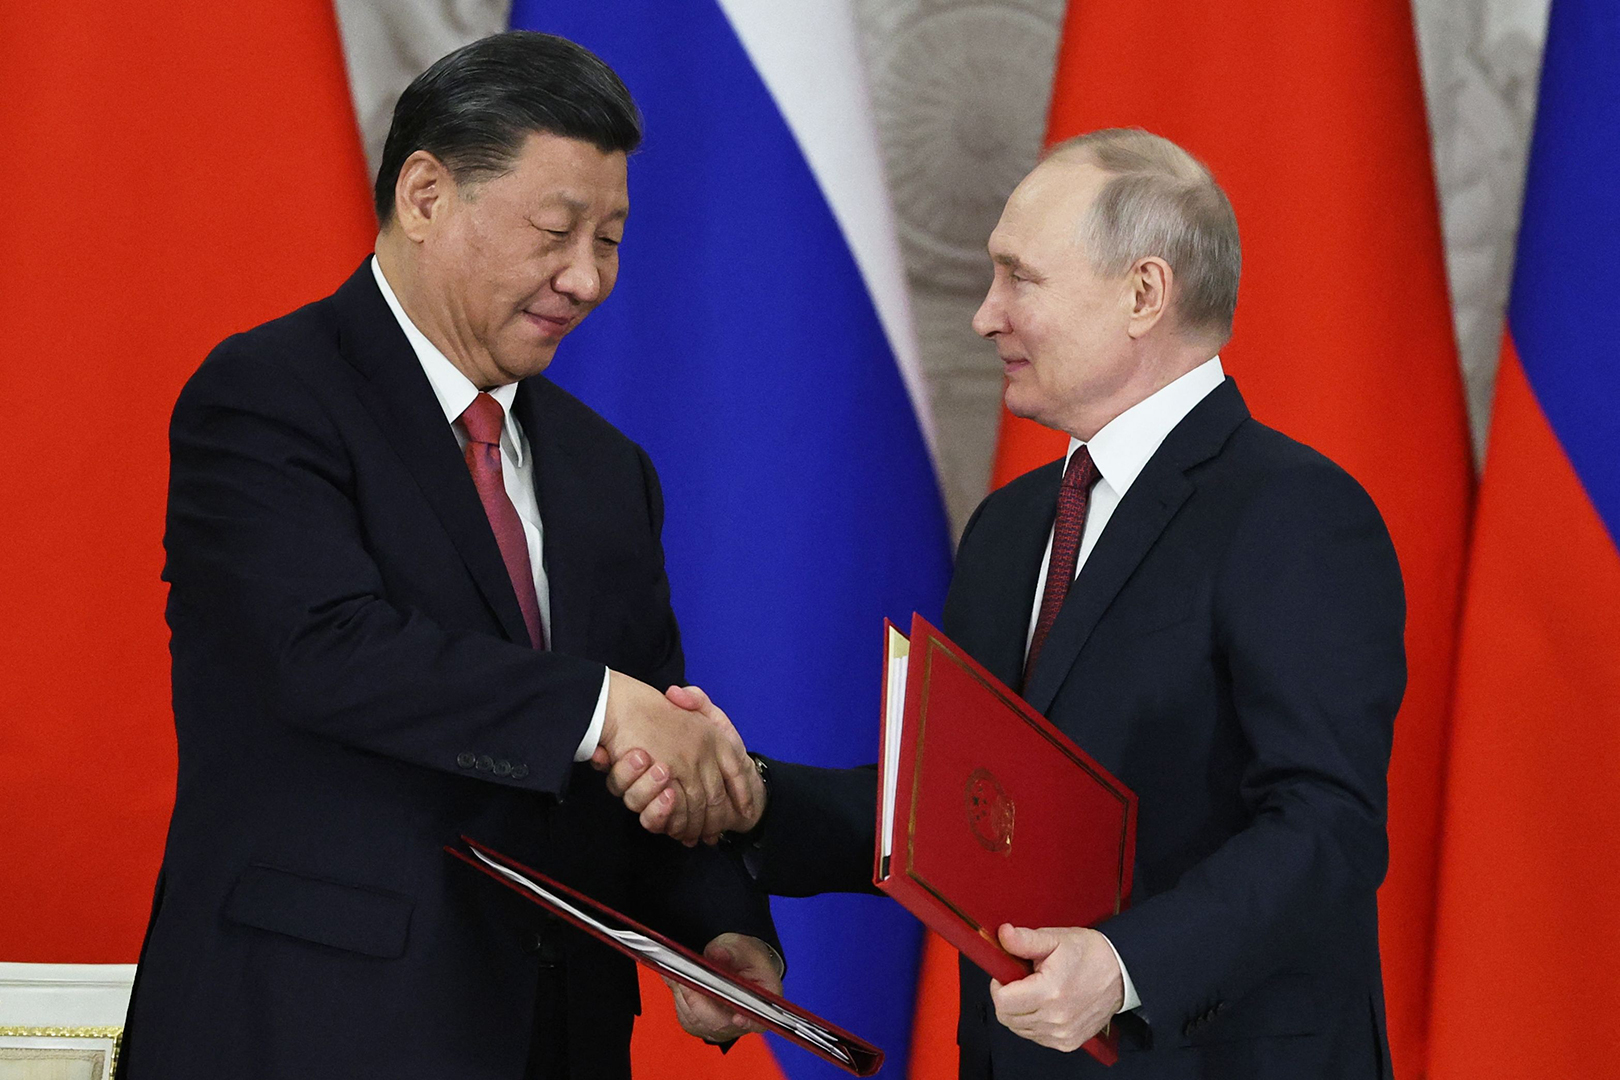 Russian President Vladimir Putin and China's President Xi Jinping shake hands during a signing ceremony following their talks at the Kremlin in Moscow on March 21. 